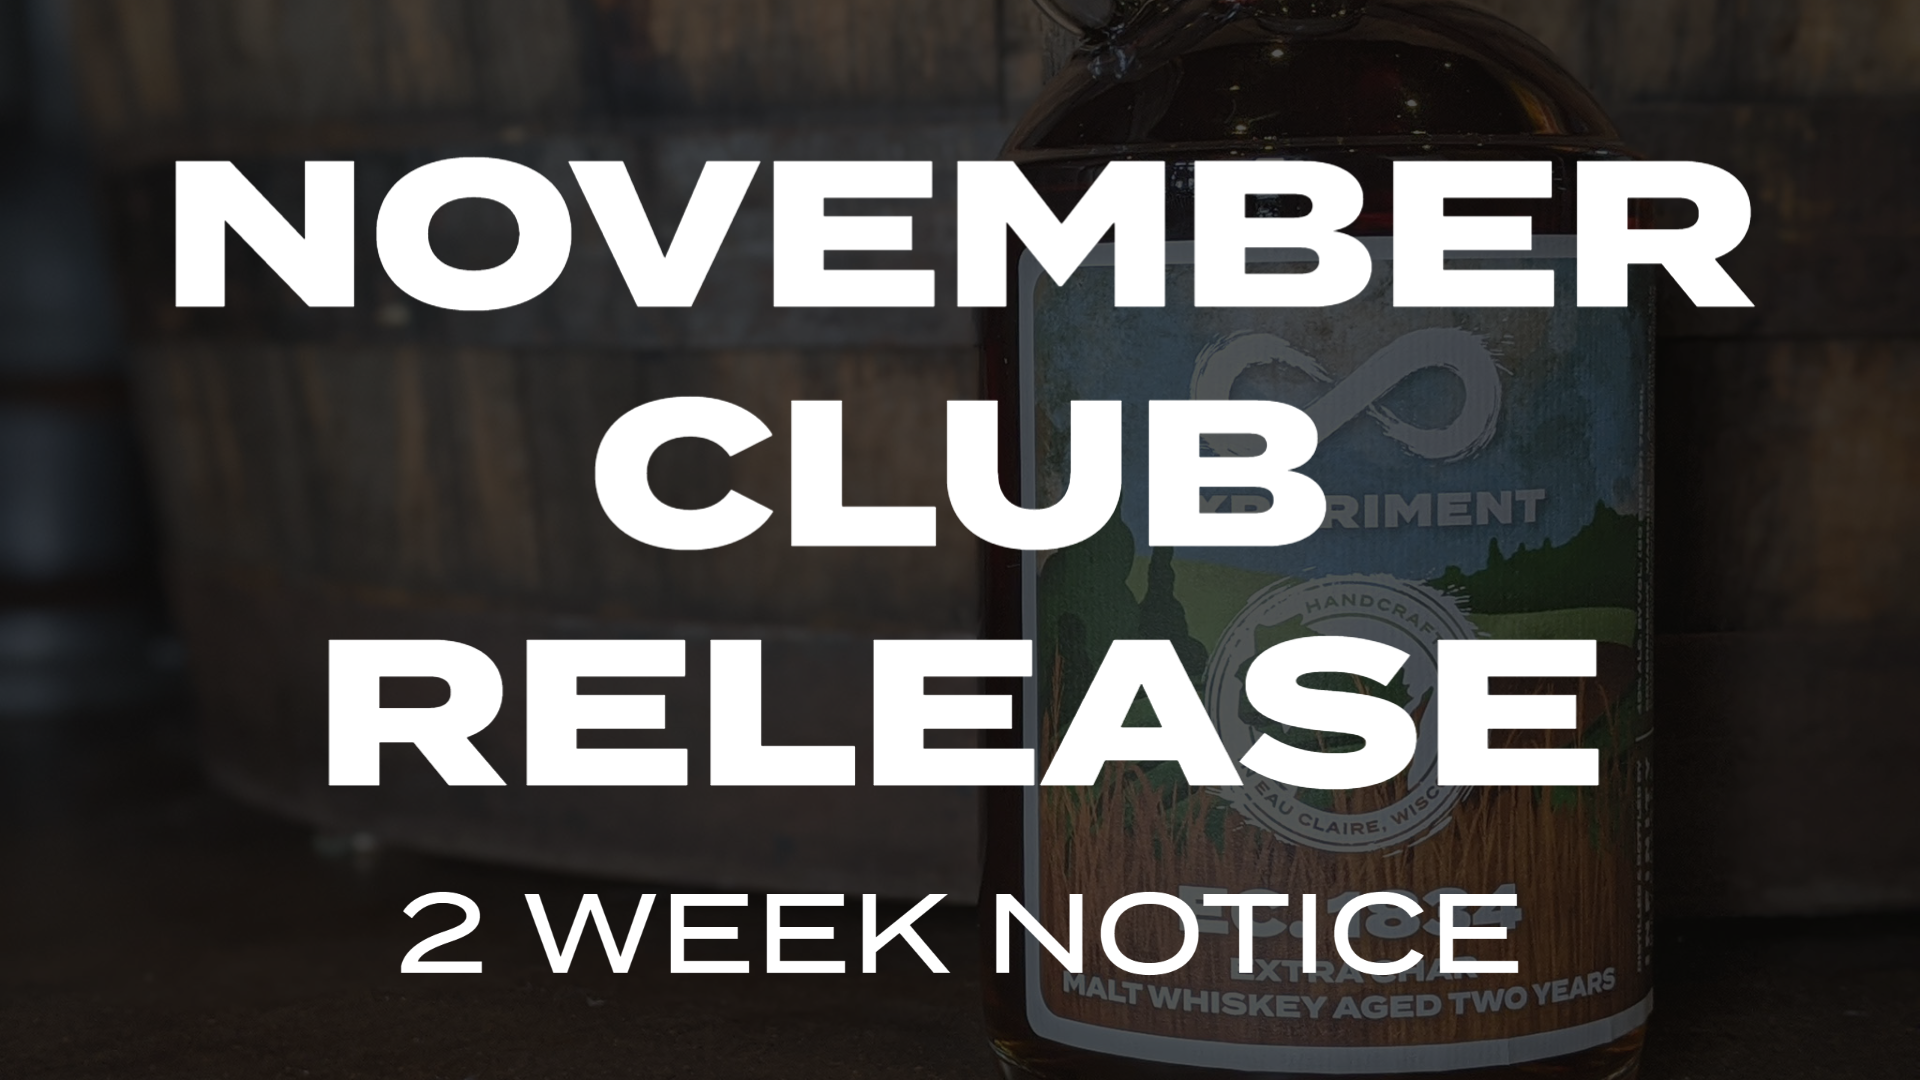 You are currently viewing NOVEMBER CLUB RELEASE 2 WEEK NOTICE